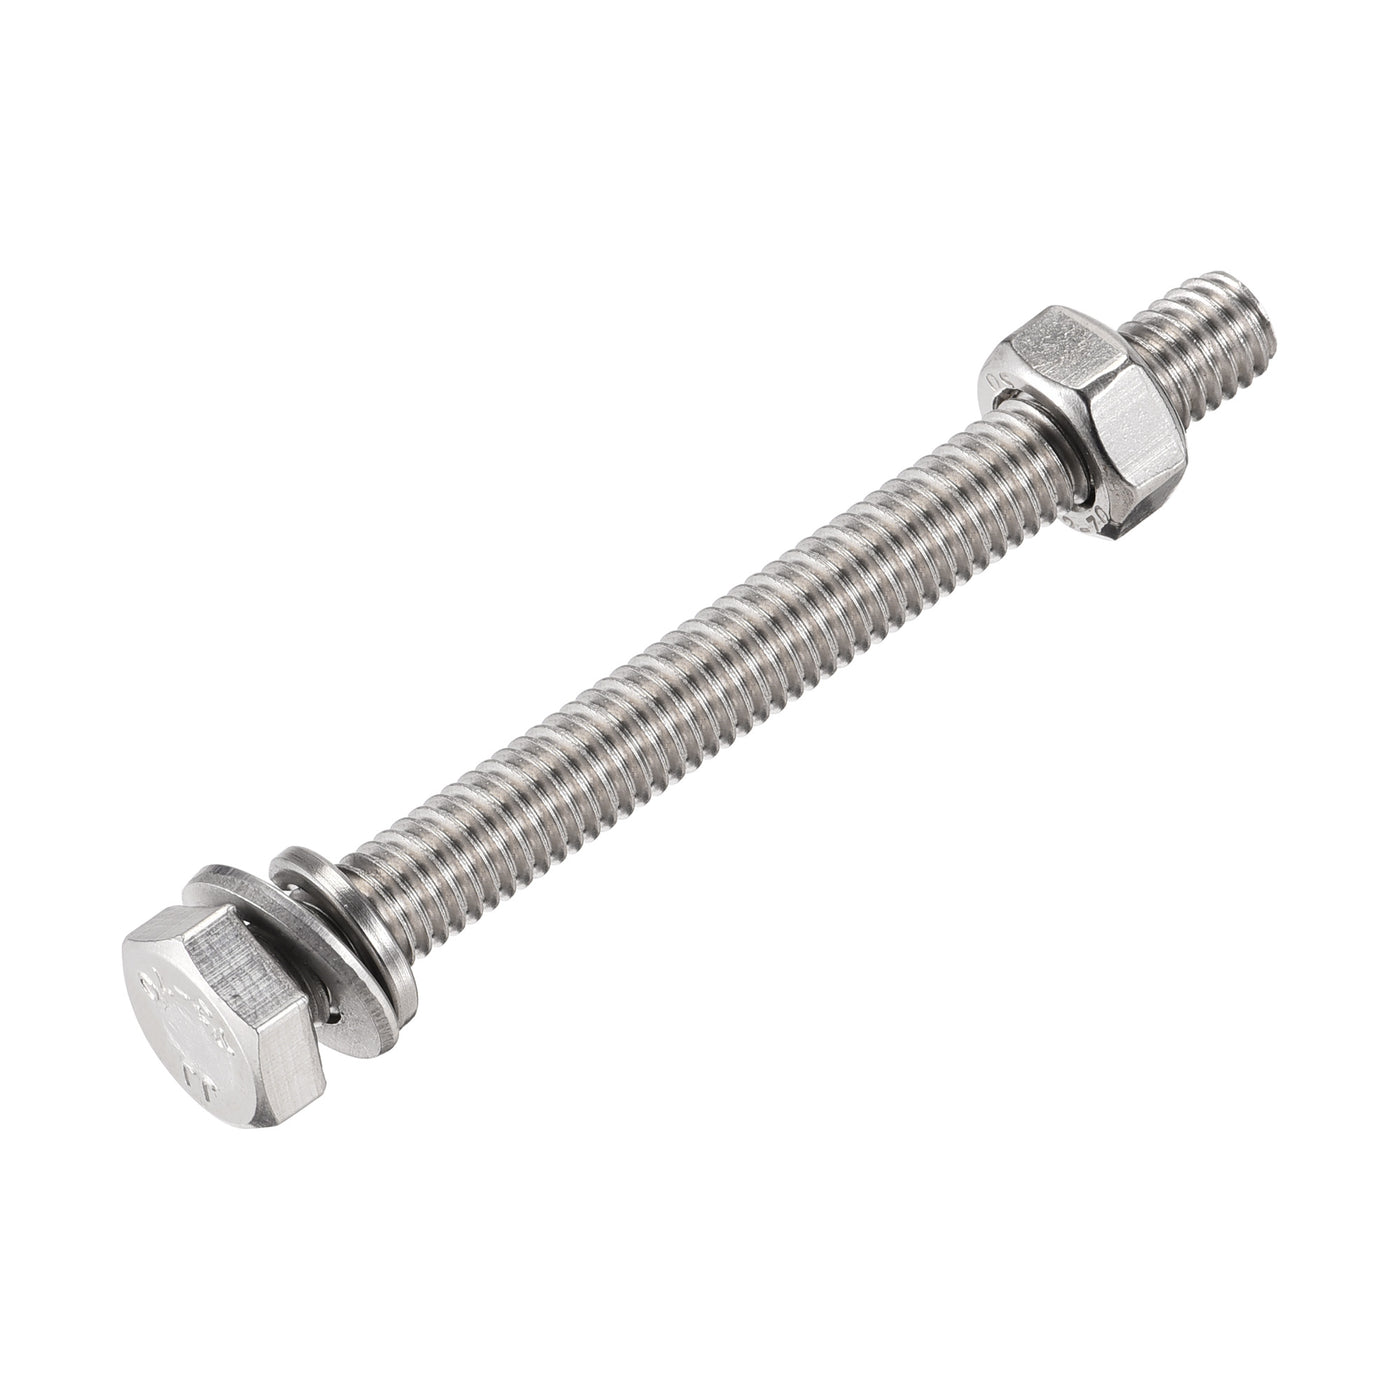 uxcell Uxcell M6 x 65mm Hex Head Screws Bolts, Nuts, Flat & Lock Washers Kits, 304 Stainless Steel Fully Thread Hexagon Bolts 6 Sets